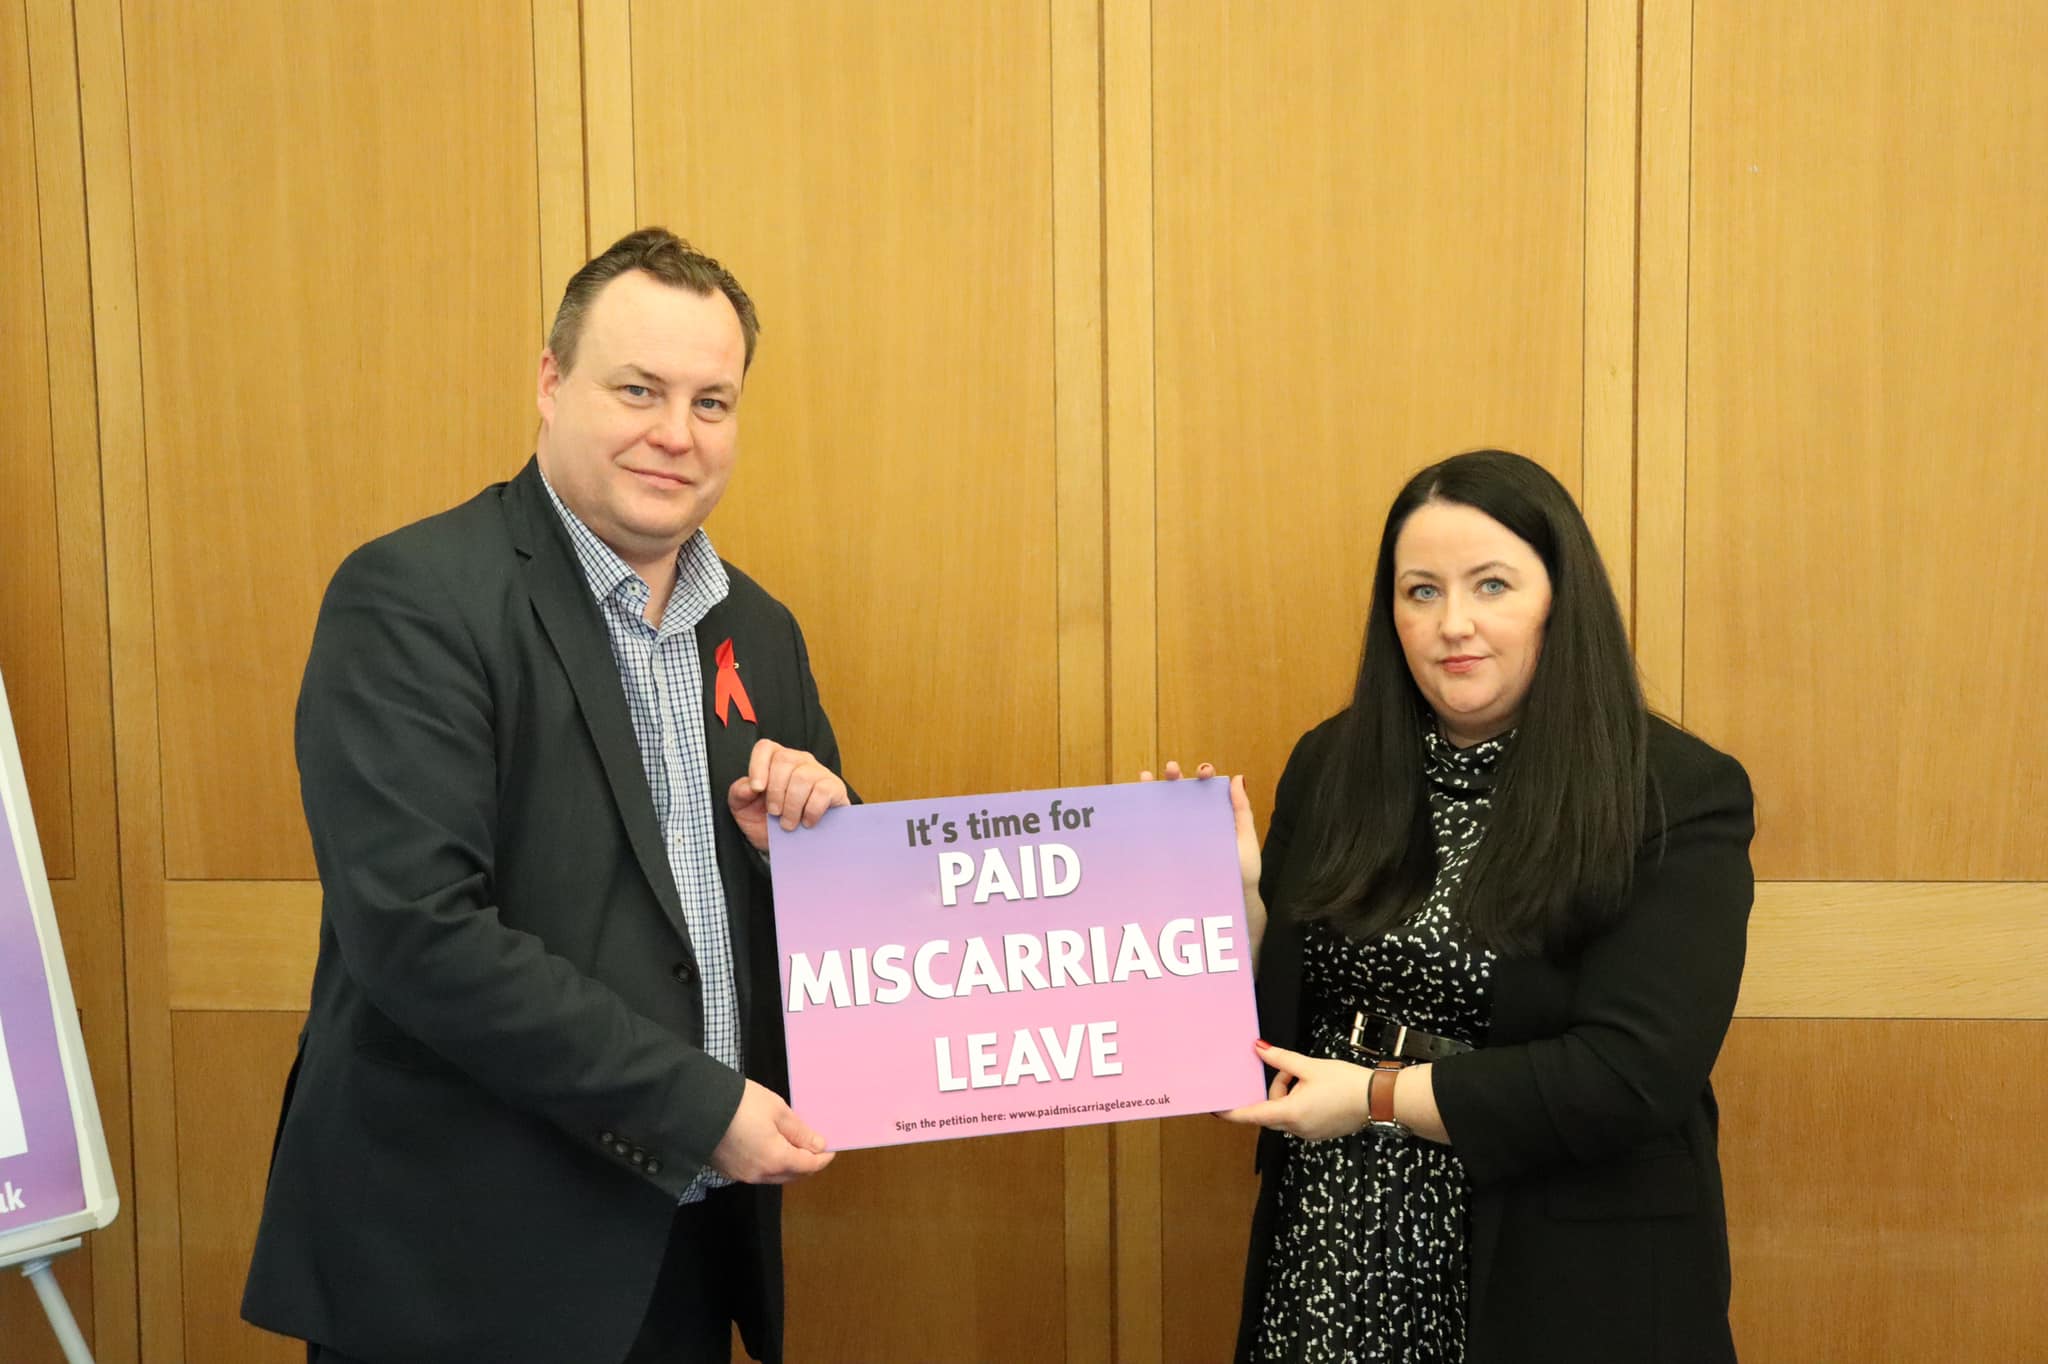 Chris Stephens MP supporting paid miscarriage leave